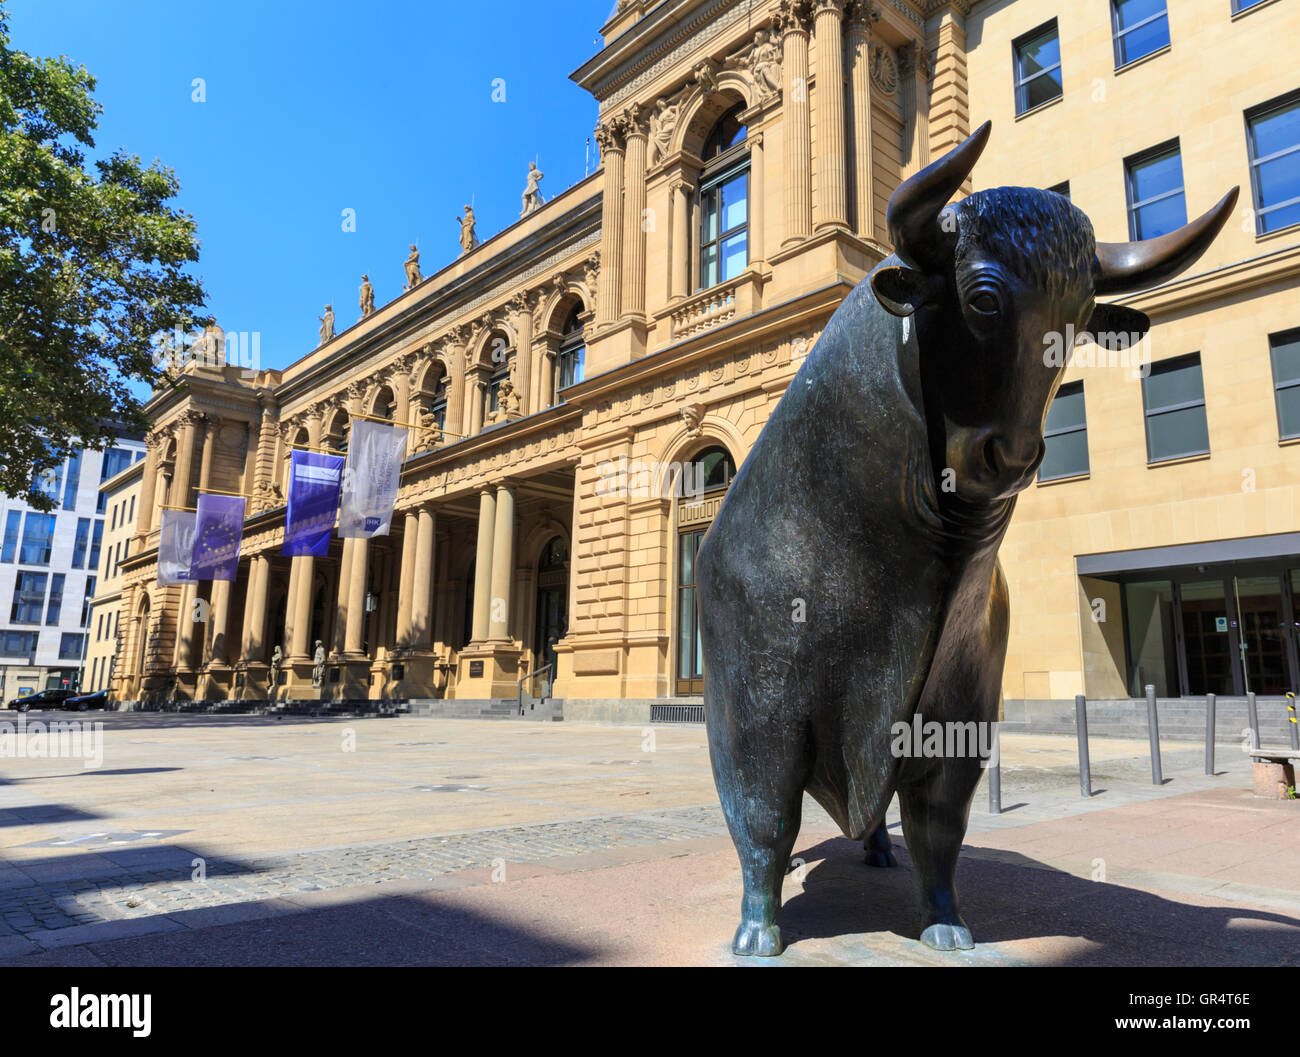 The bull sculpture in front of the German Stock Exchange, Frankfurt, Germany Stock Photo